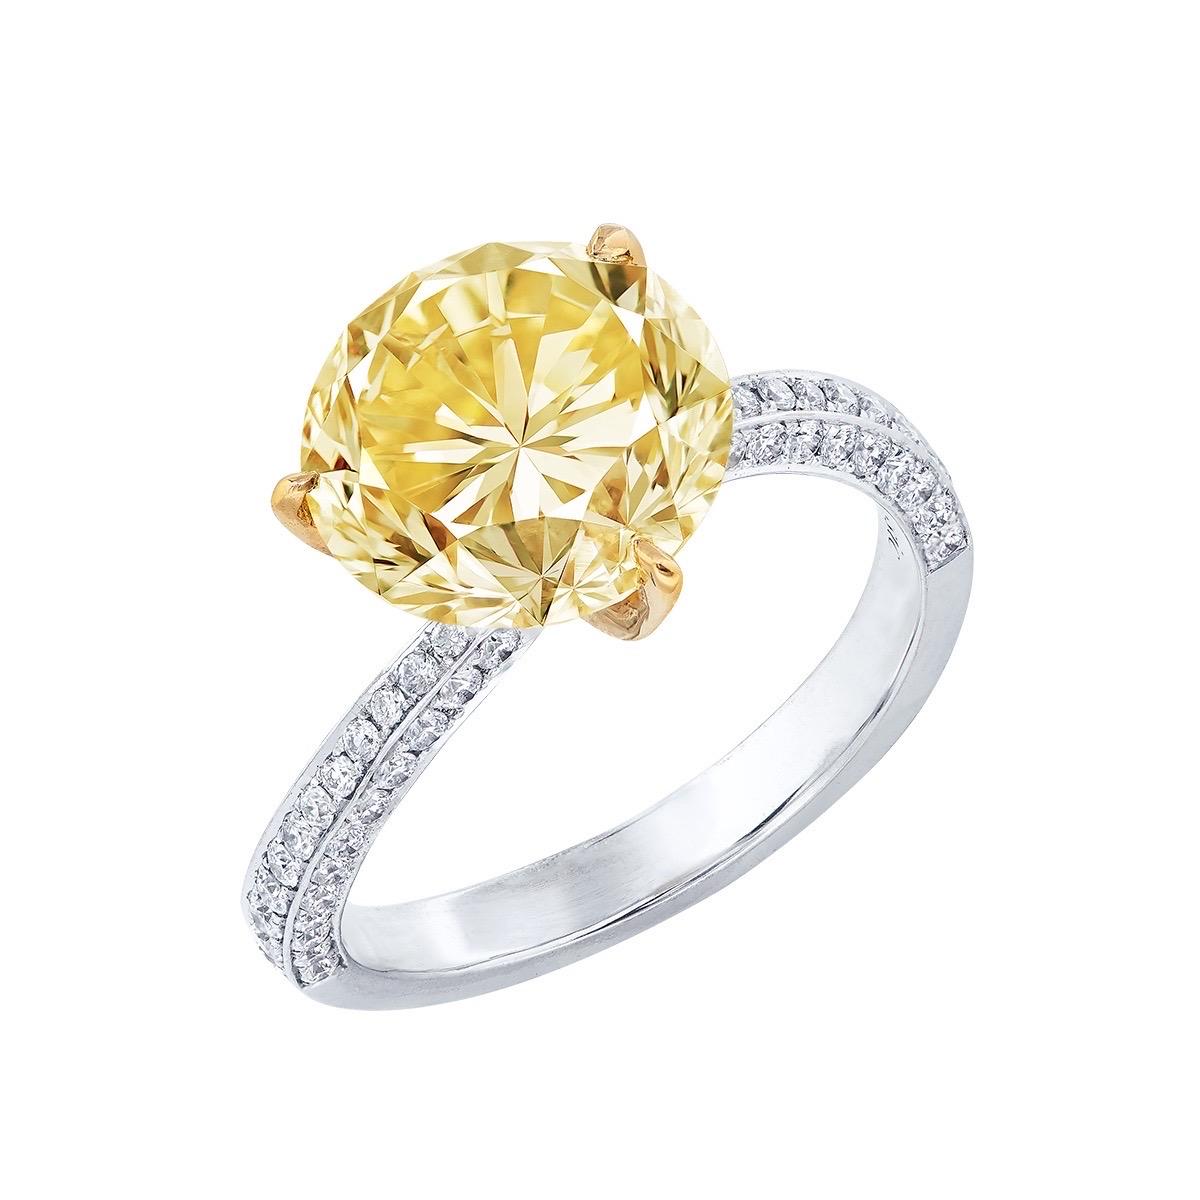 From the vault at Emilio Jewelry located on New York's iconic Fifth Avenue. 
Center Stone: Over 4.00ct Fancy Intense Yellow VVS1 ROUND
Matching: 99 white diamonds totaling about 0.45 carats, 18K
Natural colored diamonds are extremely rare, with one